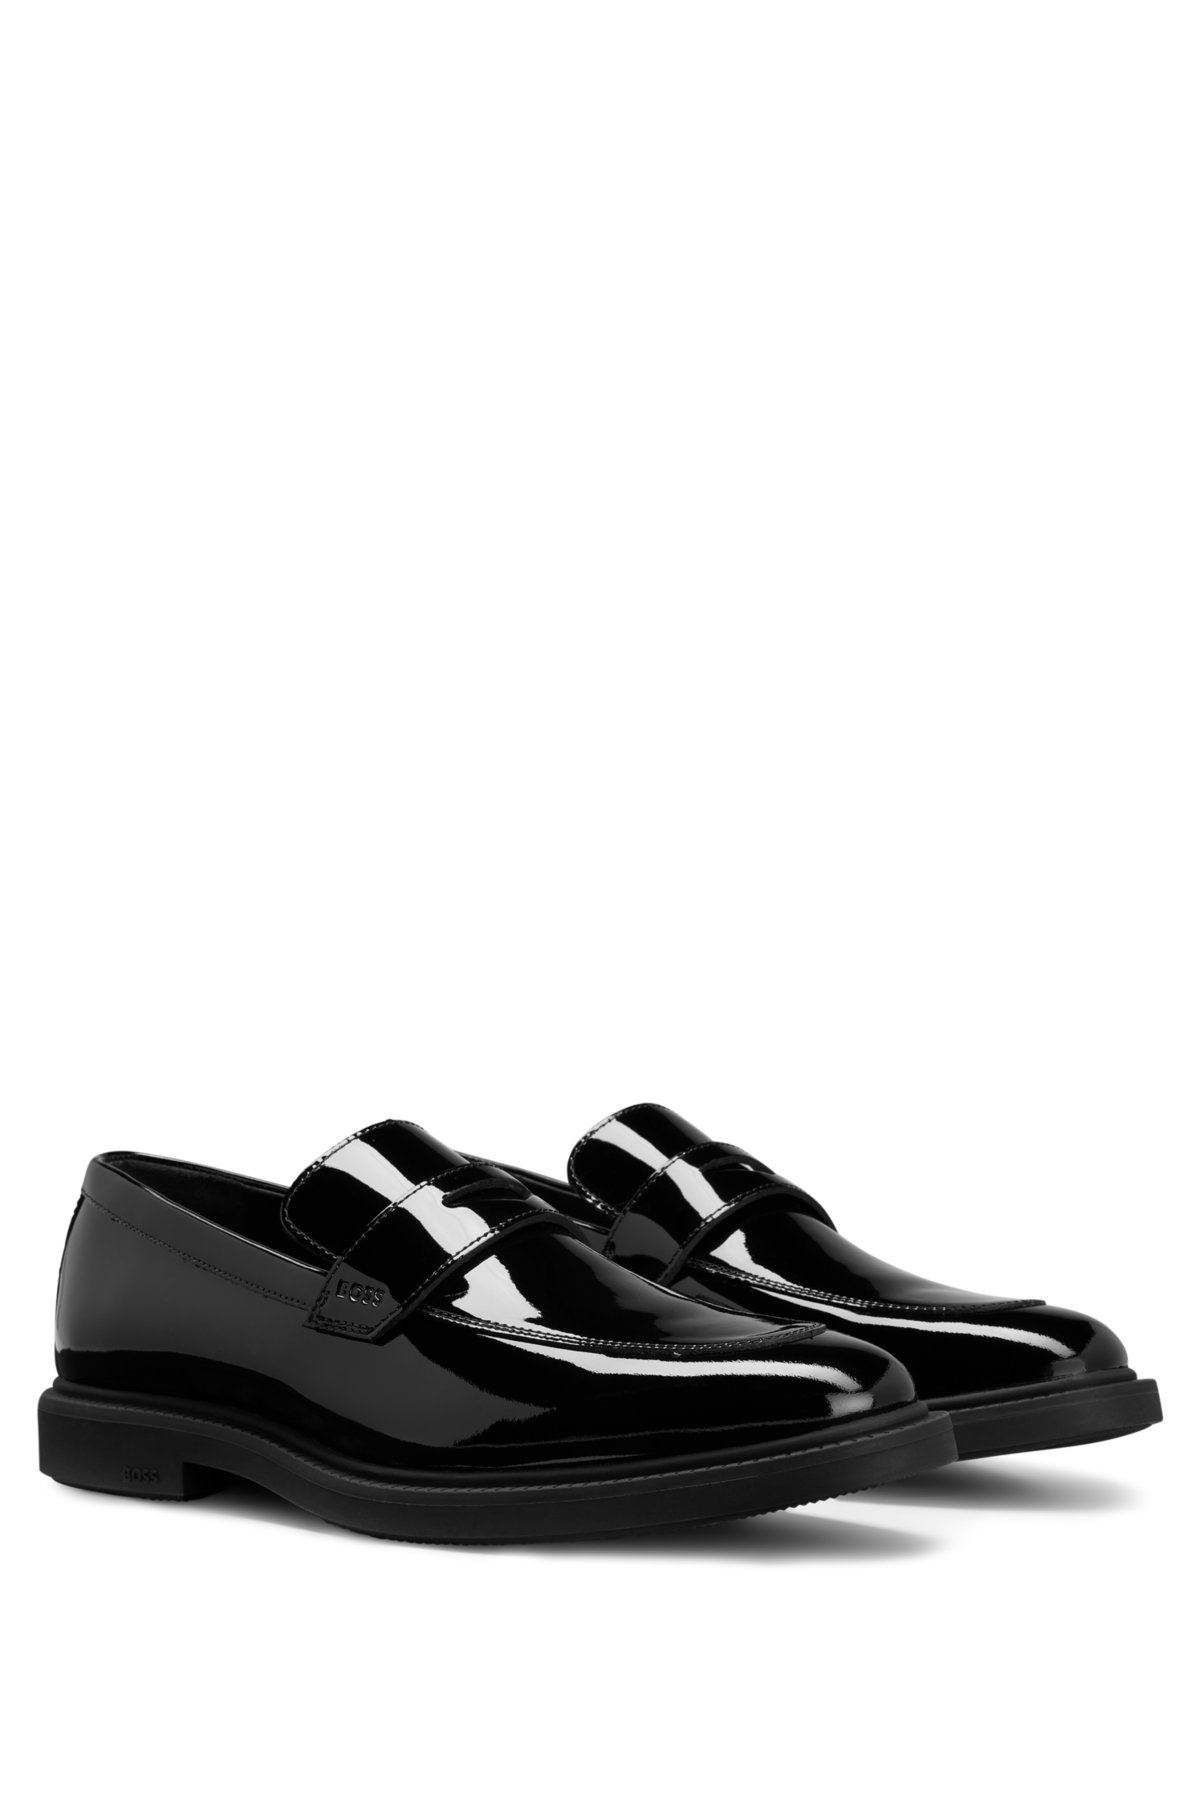 BOSS - Patent-leather loafers with black-and-gold logo detail